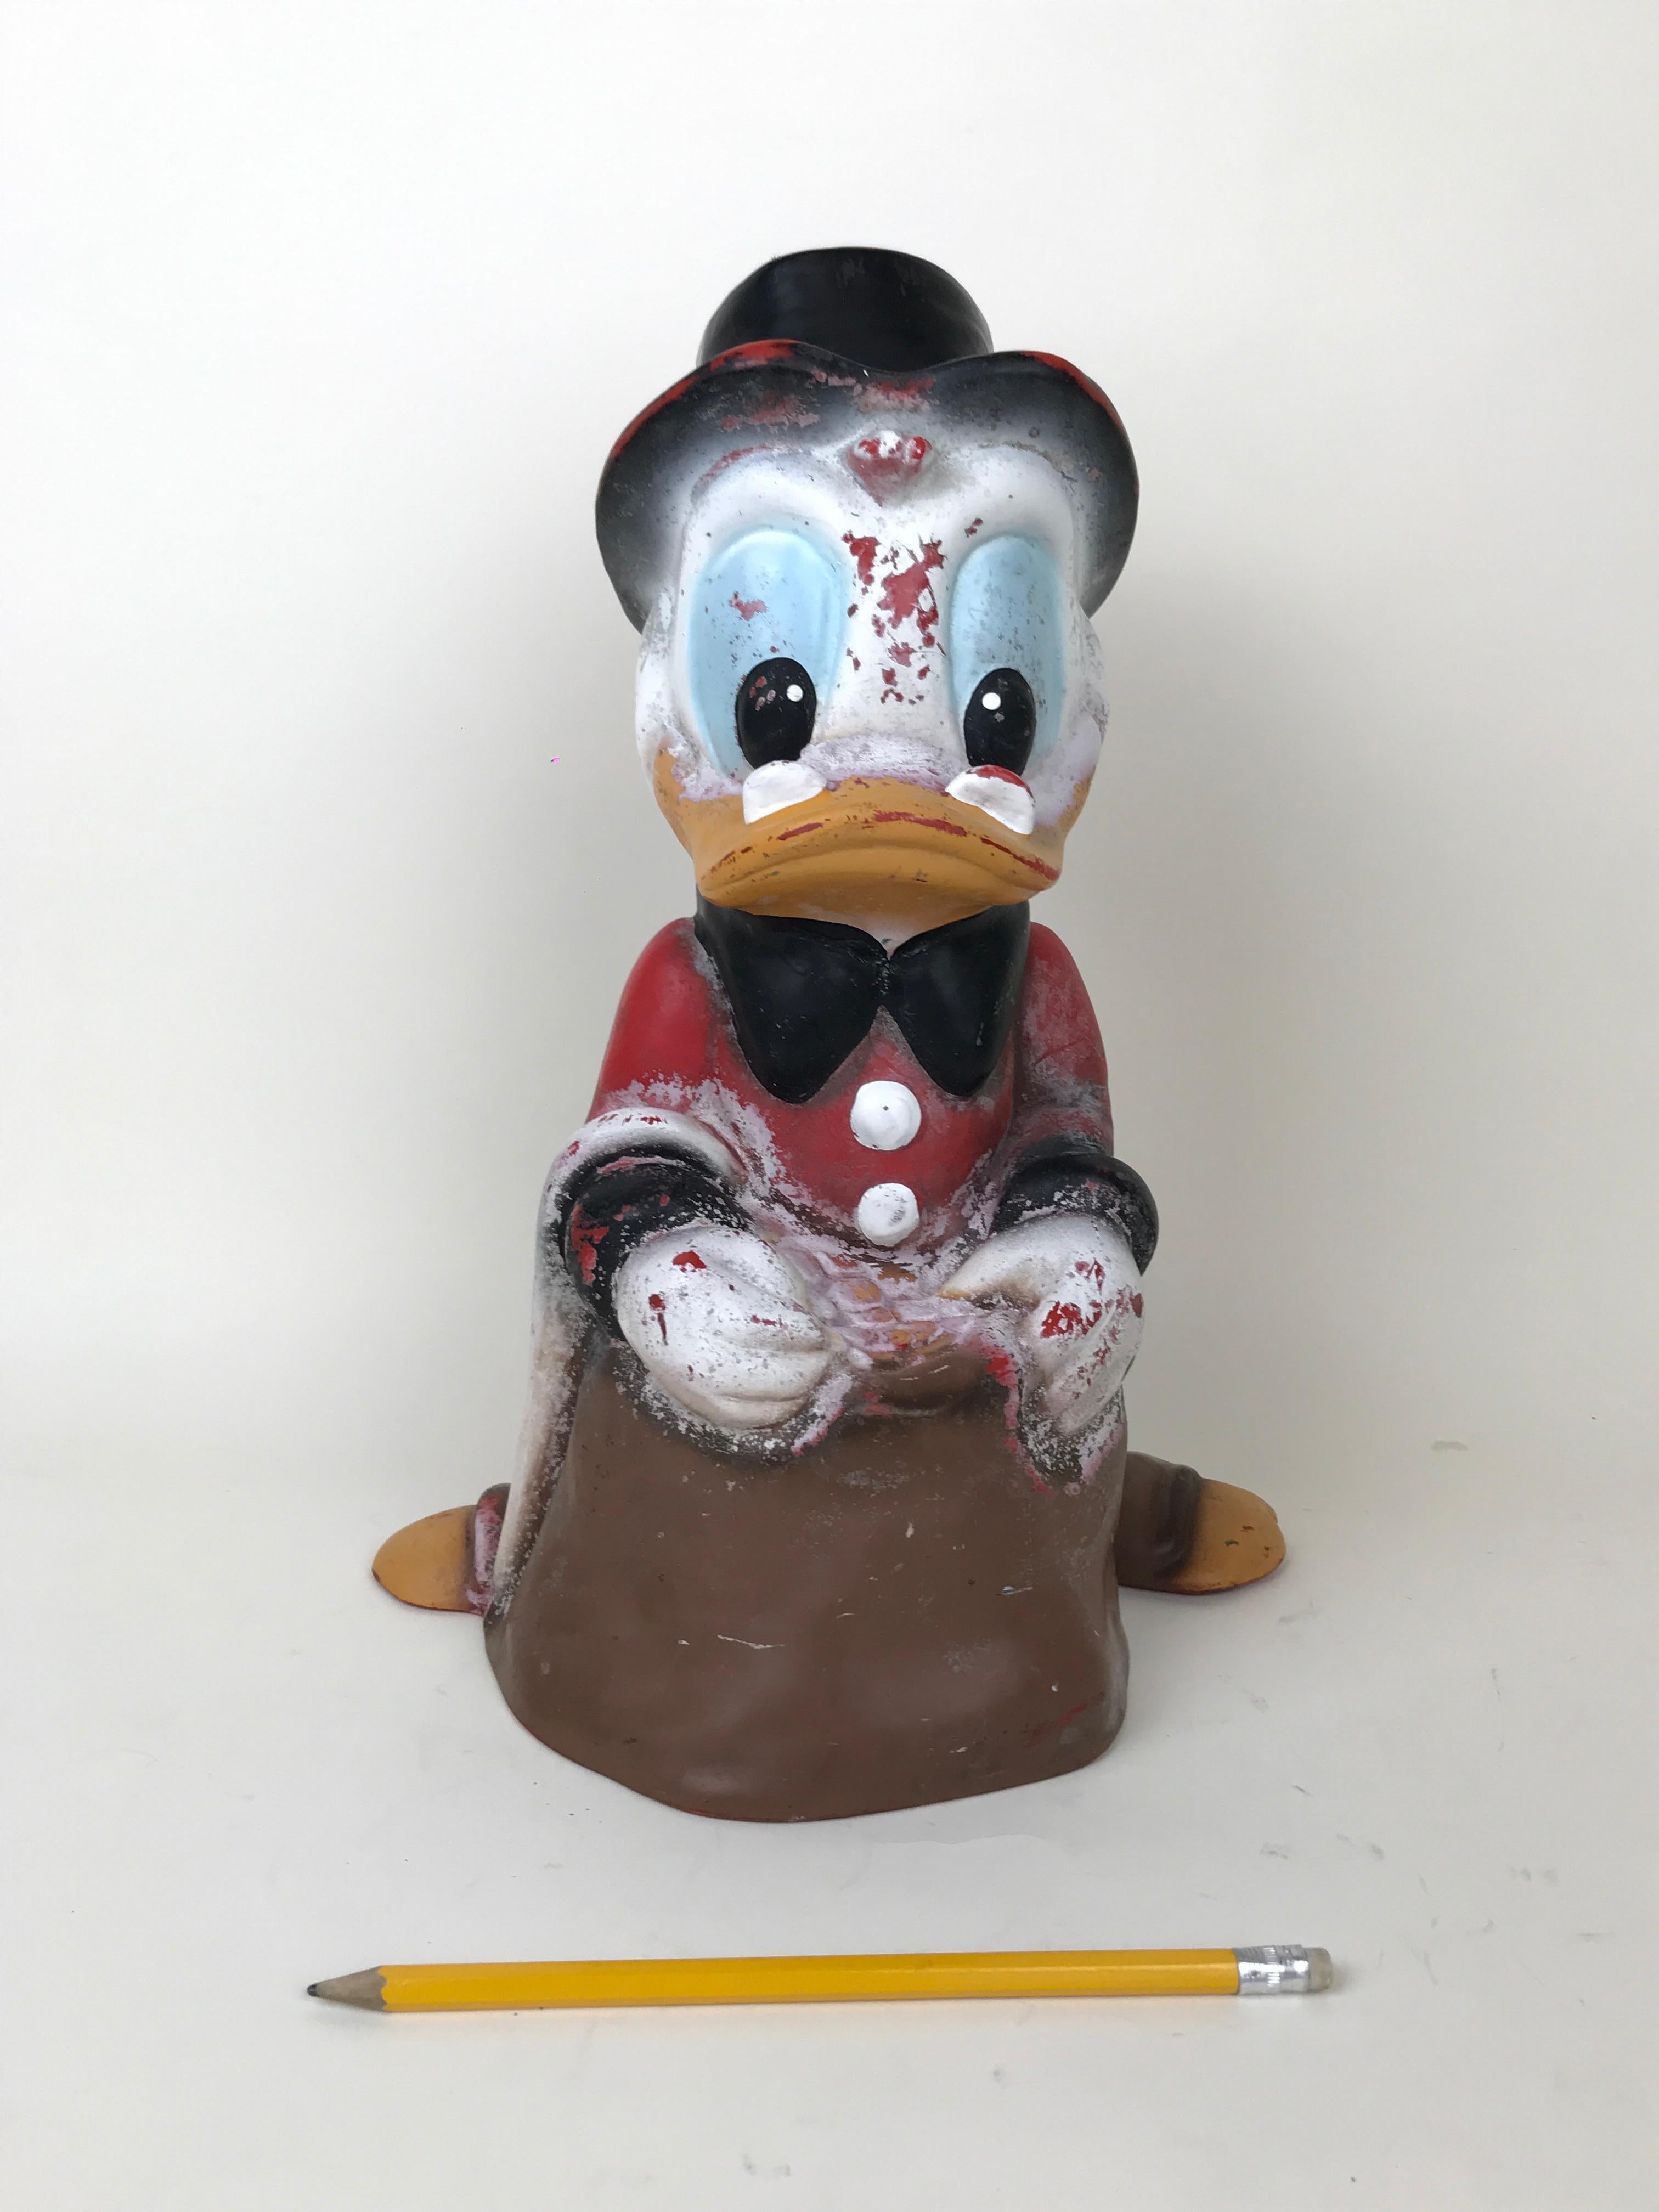 Vintage plastic garden sculpture of Uncle Scrooge. 
Made for Disney by Austrian maker Celloplast in the 1990s.

Marked Disney on the bottom back of the sculpture and CELLOPLAST ade in Austria on bottom.